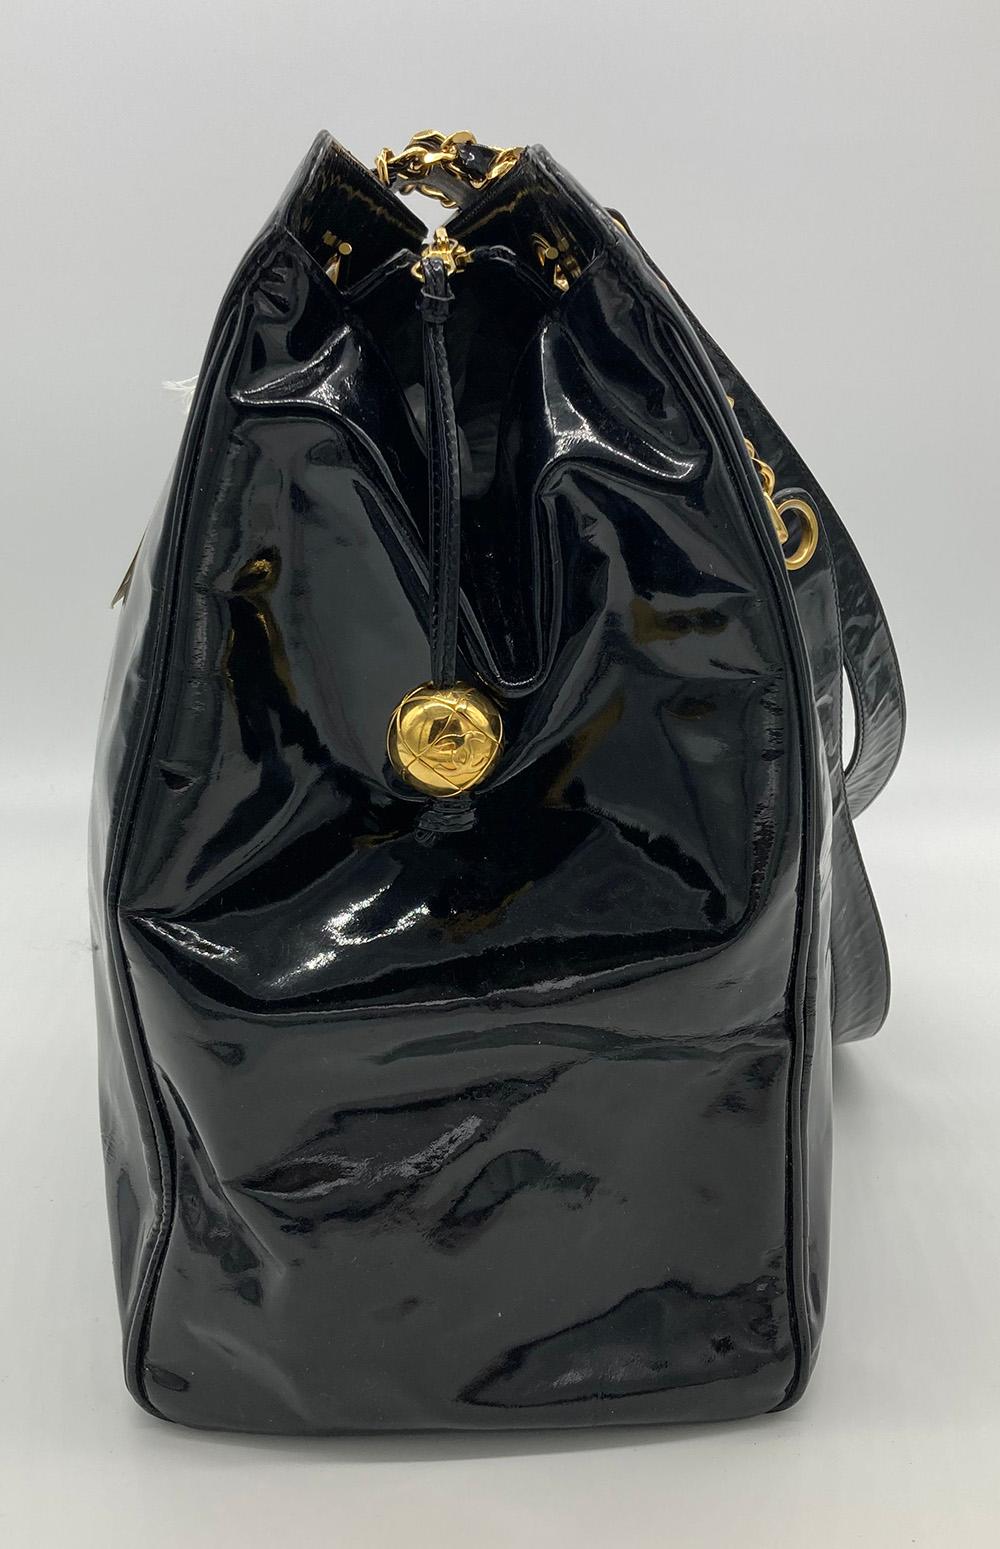 Vintage Chanel Black Patent XL Weekender Super Model Tote in fair condition. Black patent leather exterior trimmed with woven leather and chain patent leather shoulder straps and gold hardware in timeless vintage super model weekender style.